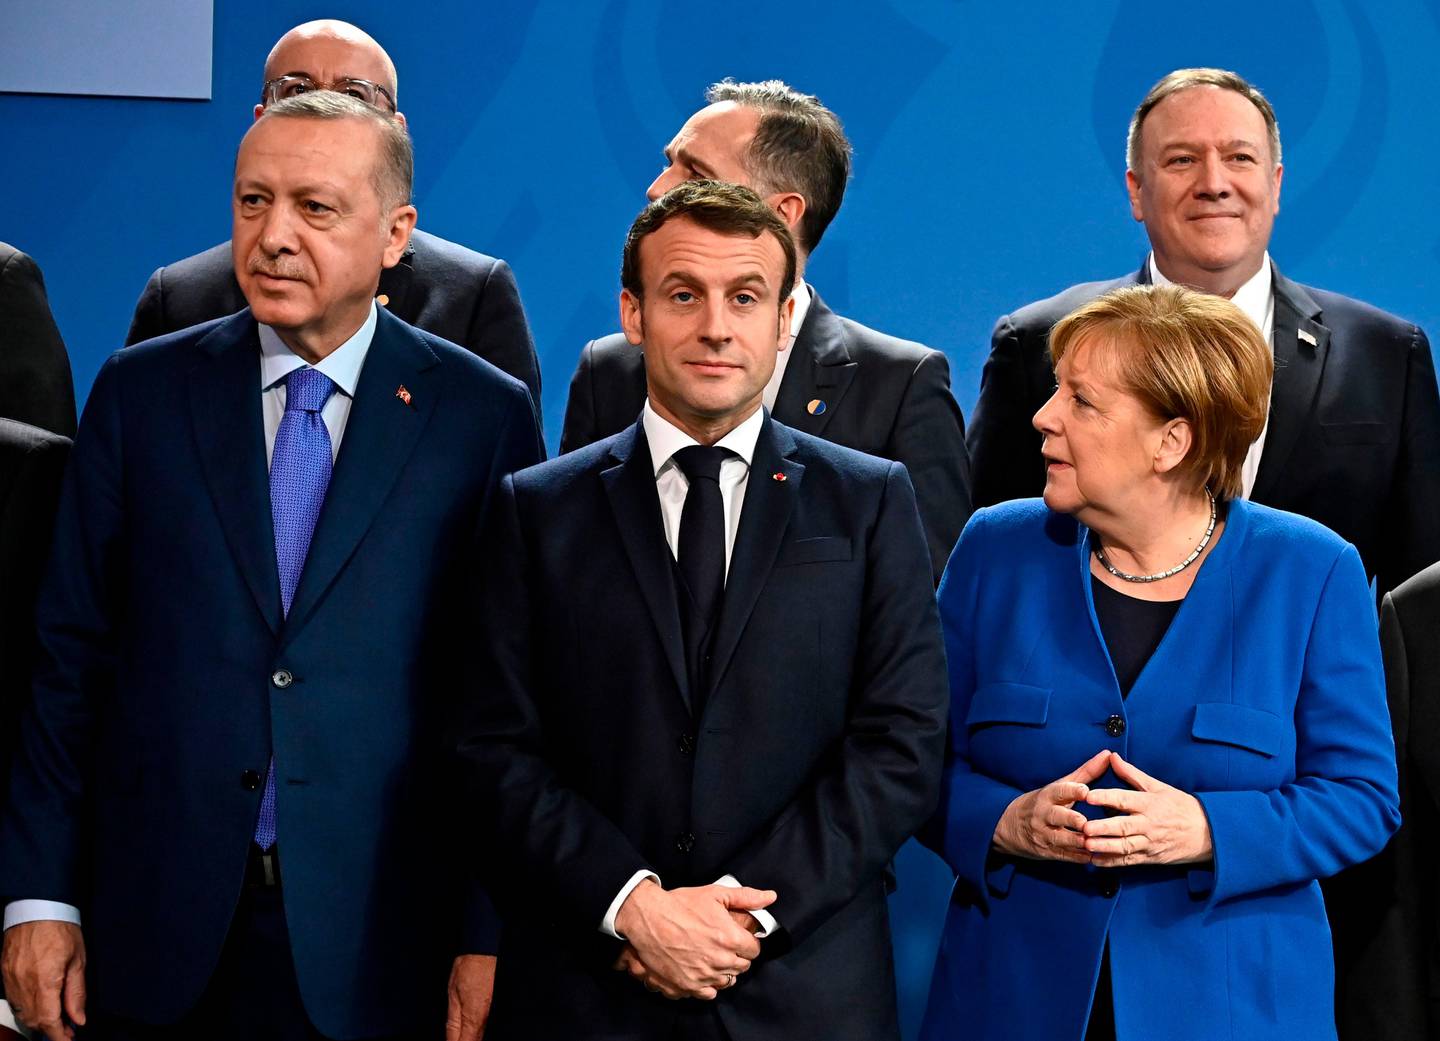 (Front row, L to R) Turkish President Recep Tayyip Erdogan, French President Emmanuel Macron, German Chancellor Angela Merkel, (second row, L to R) European Council President Charles Michel, German Foreign Minister Heiko Maas and US Secretary of State Mike Pompeo pose for a family picture during a Peace summit on Libya at the Chancellery in Berlin, on January 19, 2020. - World leaders gather in Berlin on January 19, 2020 to make a fresh push for peace in Libya, in a desperate bid to stop the conflict-wracked nation from turning into a "second Syria". Chancellor Angela Merkel will be joined by the presidents of Russia, Turkey and France and other world leaders for talks held under the auspices of the United Nations. (Photo by Tobias SCHWARZ / AFP)